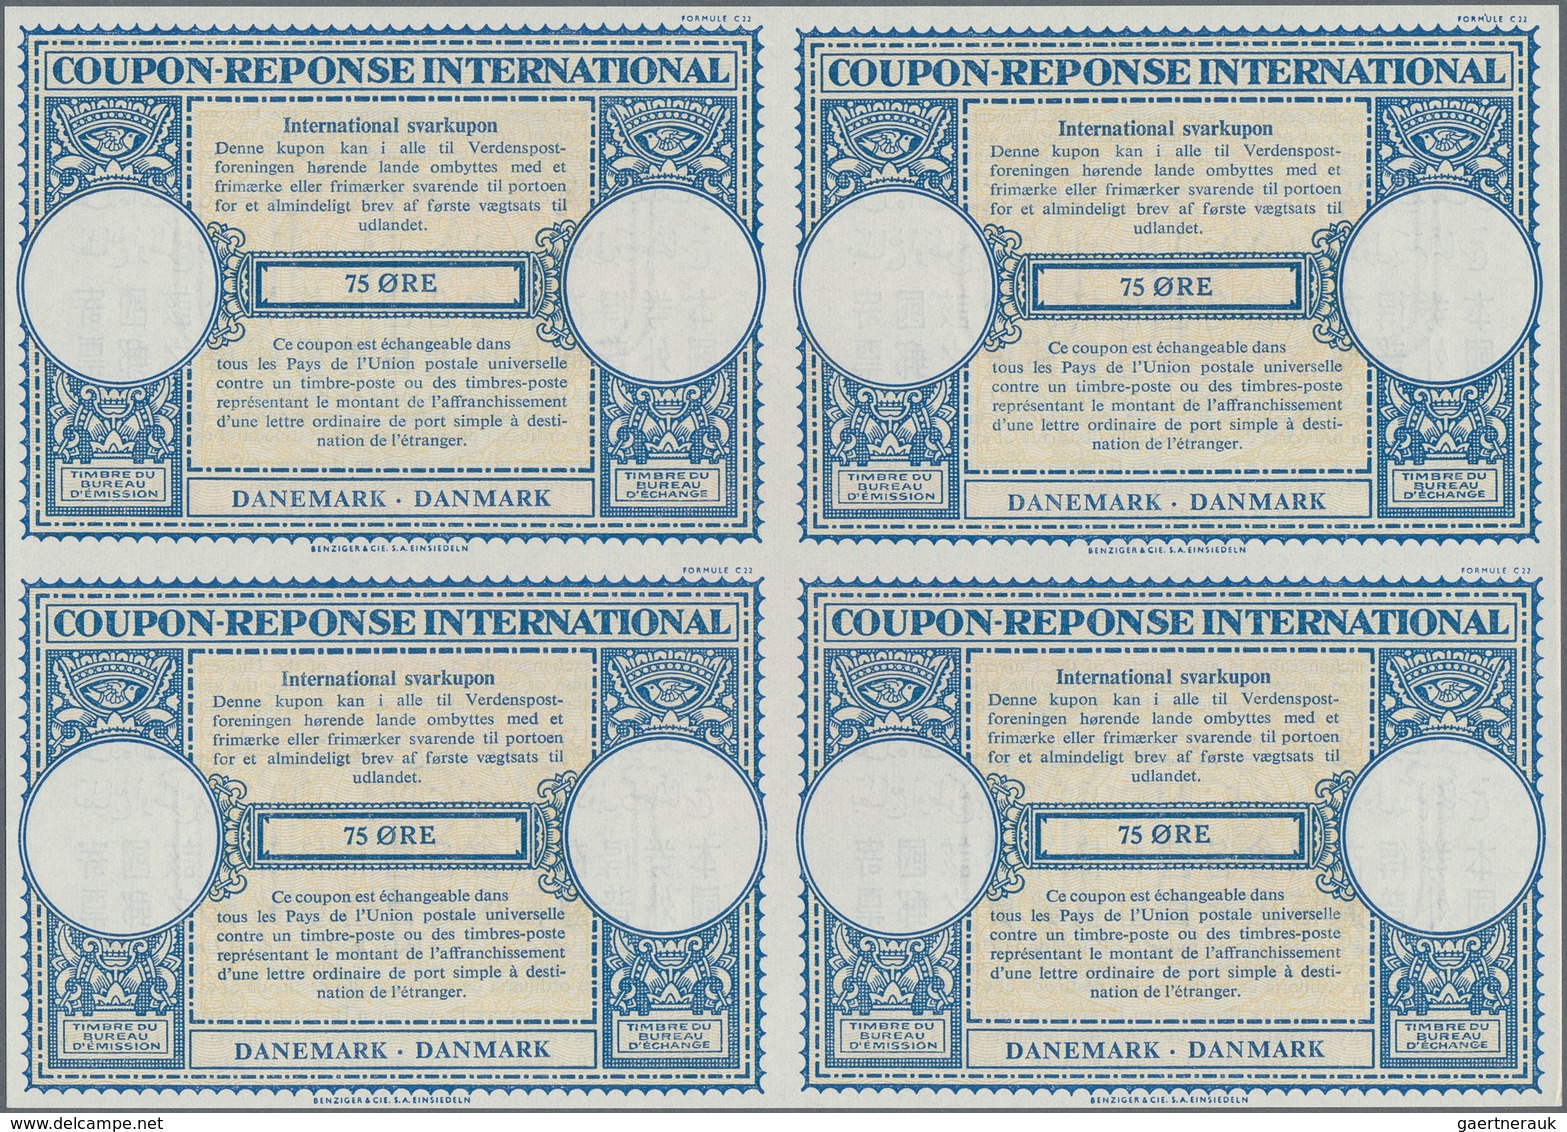 Dänemark - Ganzsachen: 1955. International Reply Coupon 75 Ore (London Type) In An Unused Block Of 4 - Postal Stationery